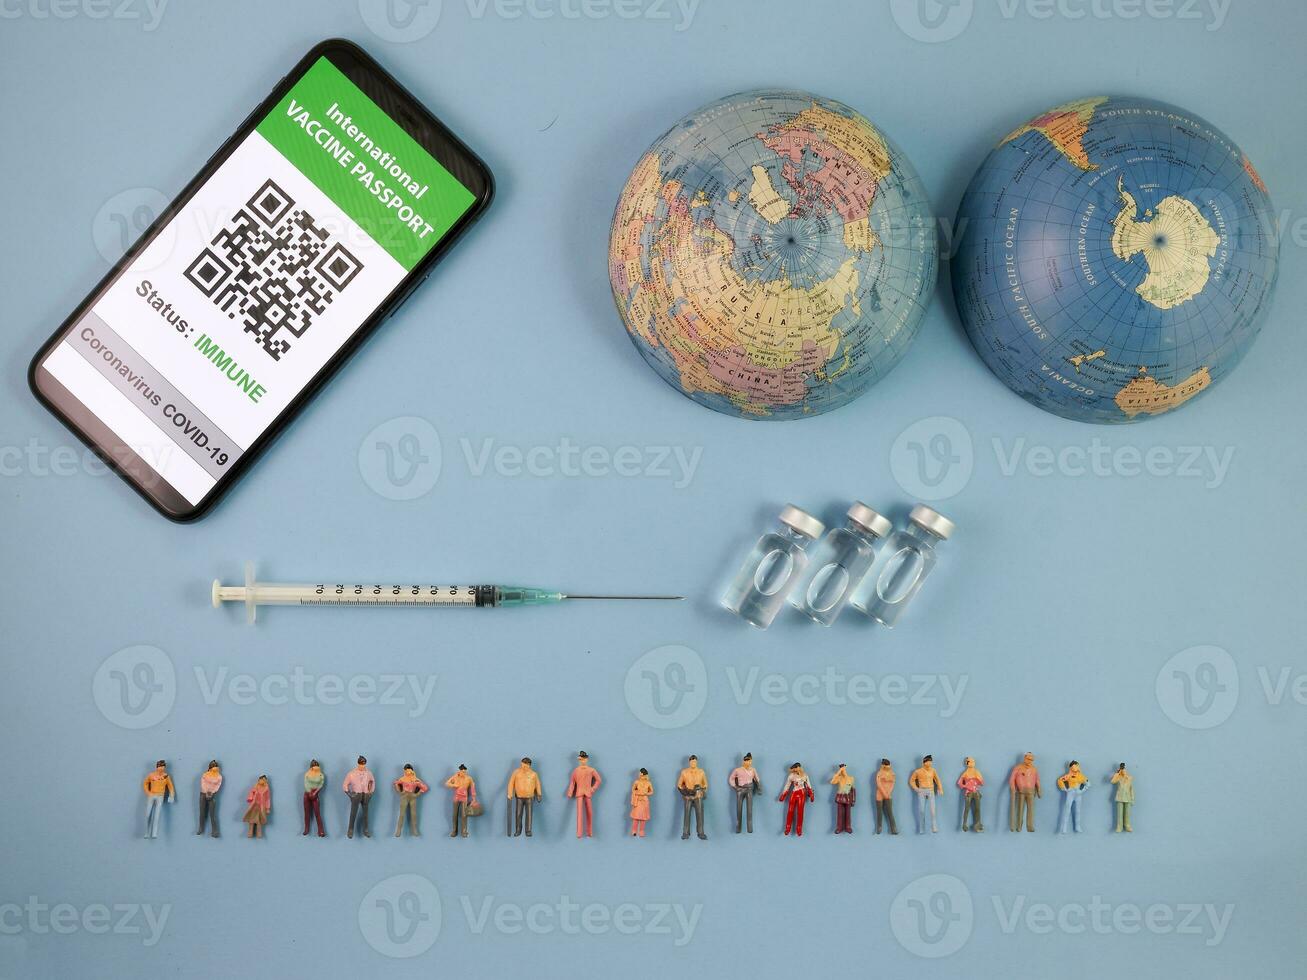 Miniature human figure figurine male female doll row vaccine passport digital paper book bottle medical injection syringe needle world map globe border copy text sign space on blue paper background photo